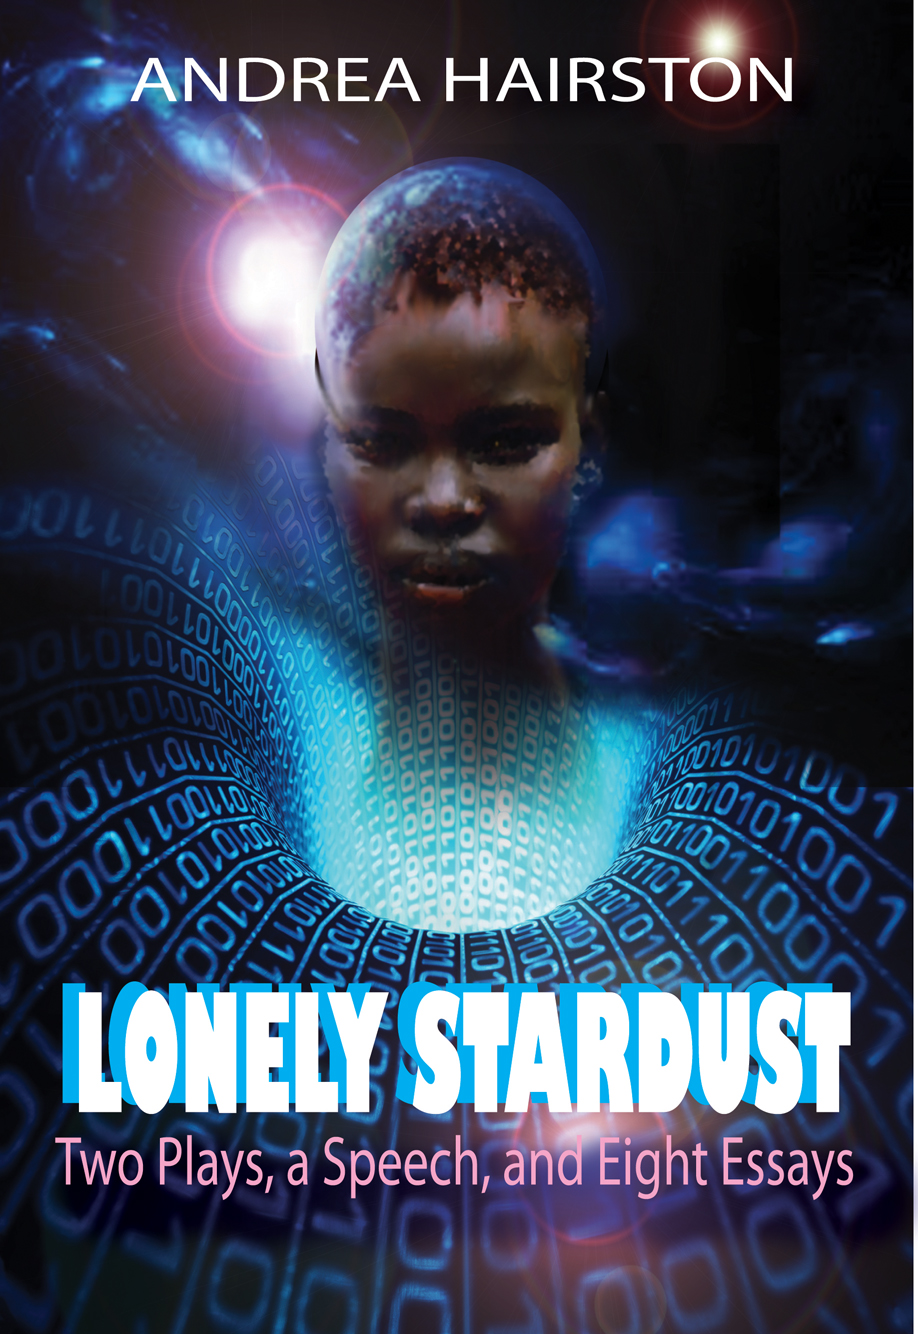 Lonely Stardust